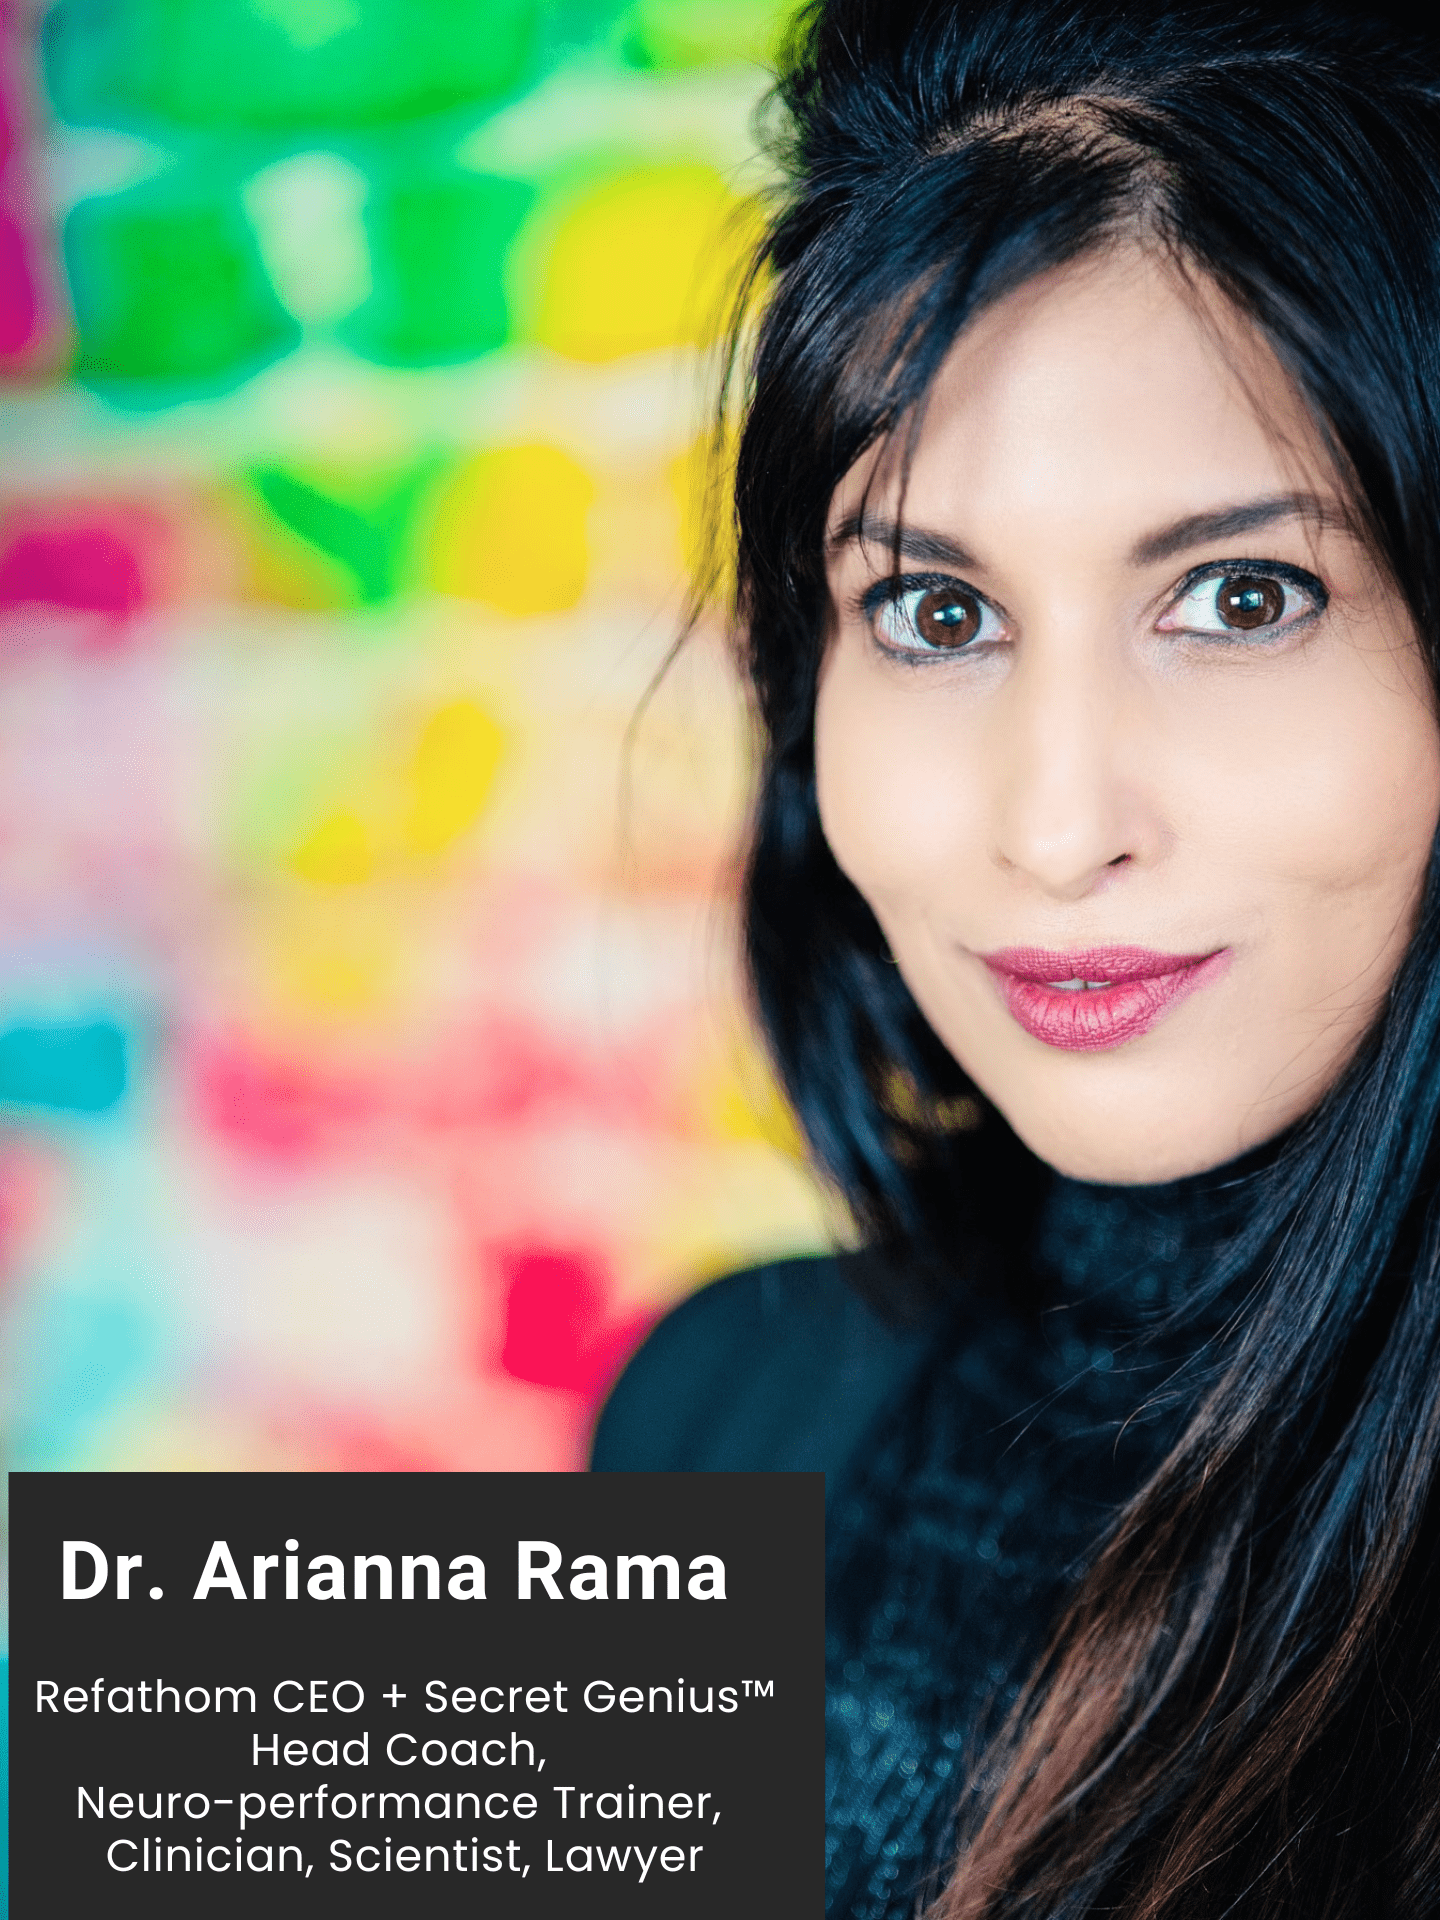 Arianna Rama redefines corporate health and wellness with brain-based training and brings her 17 yr industry expertise as a clinician, scientist, lawyer, and executive trainer